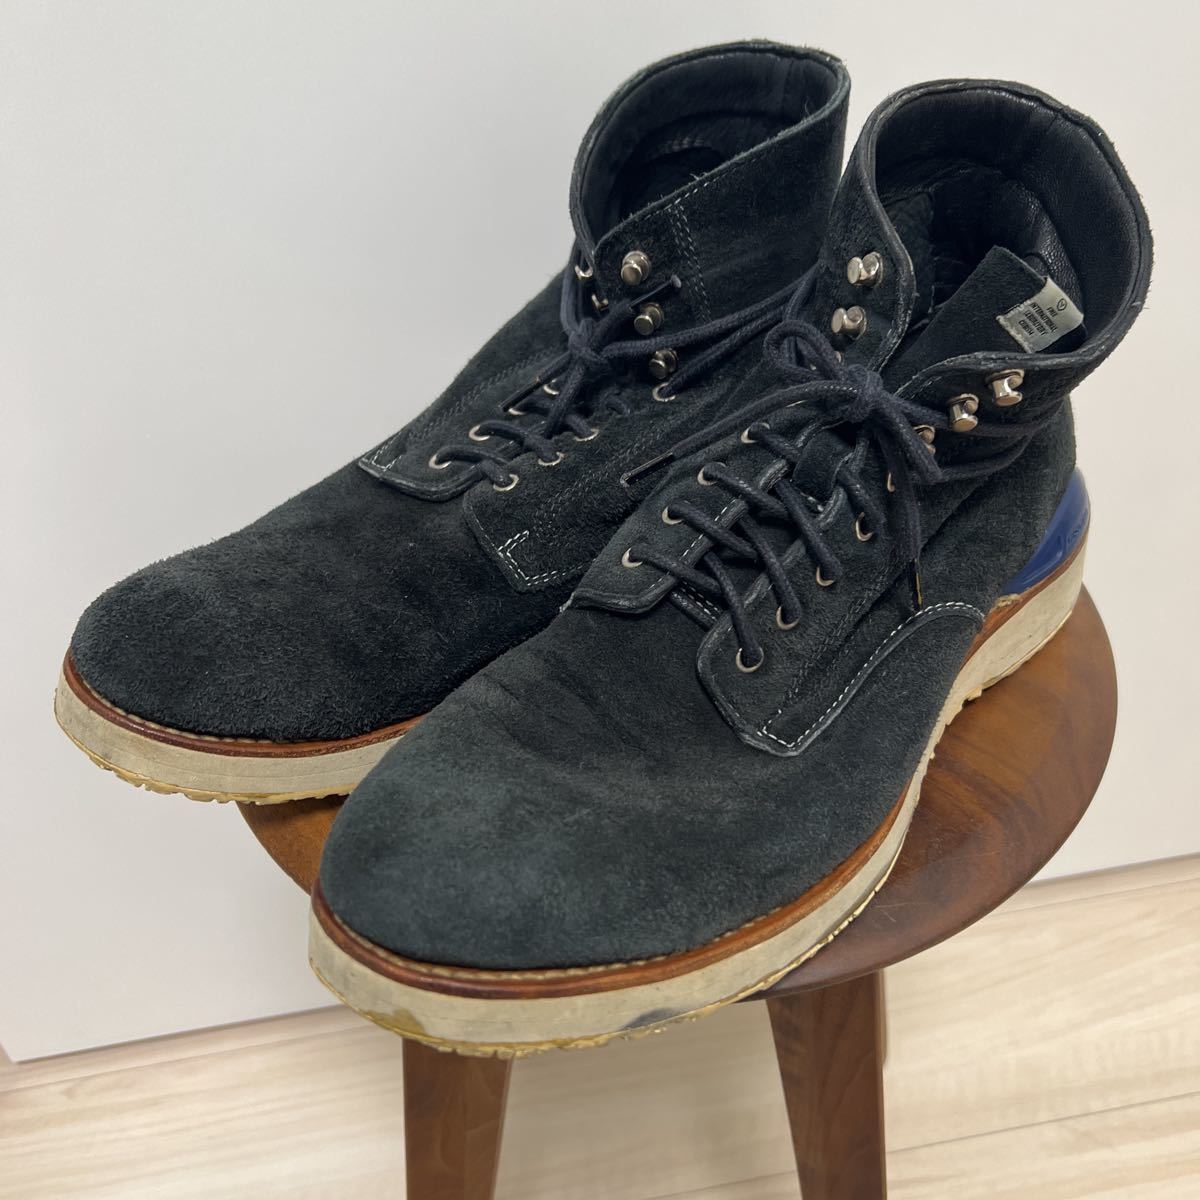 Shoes   Visvim   Japanese name Starts with Hi   Classified by